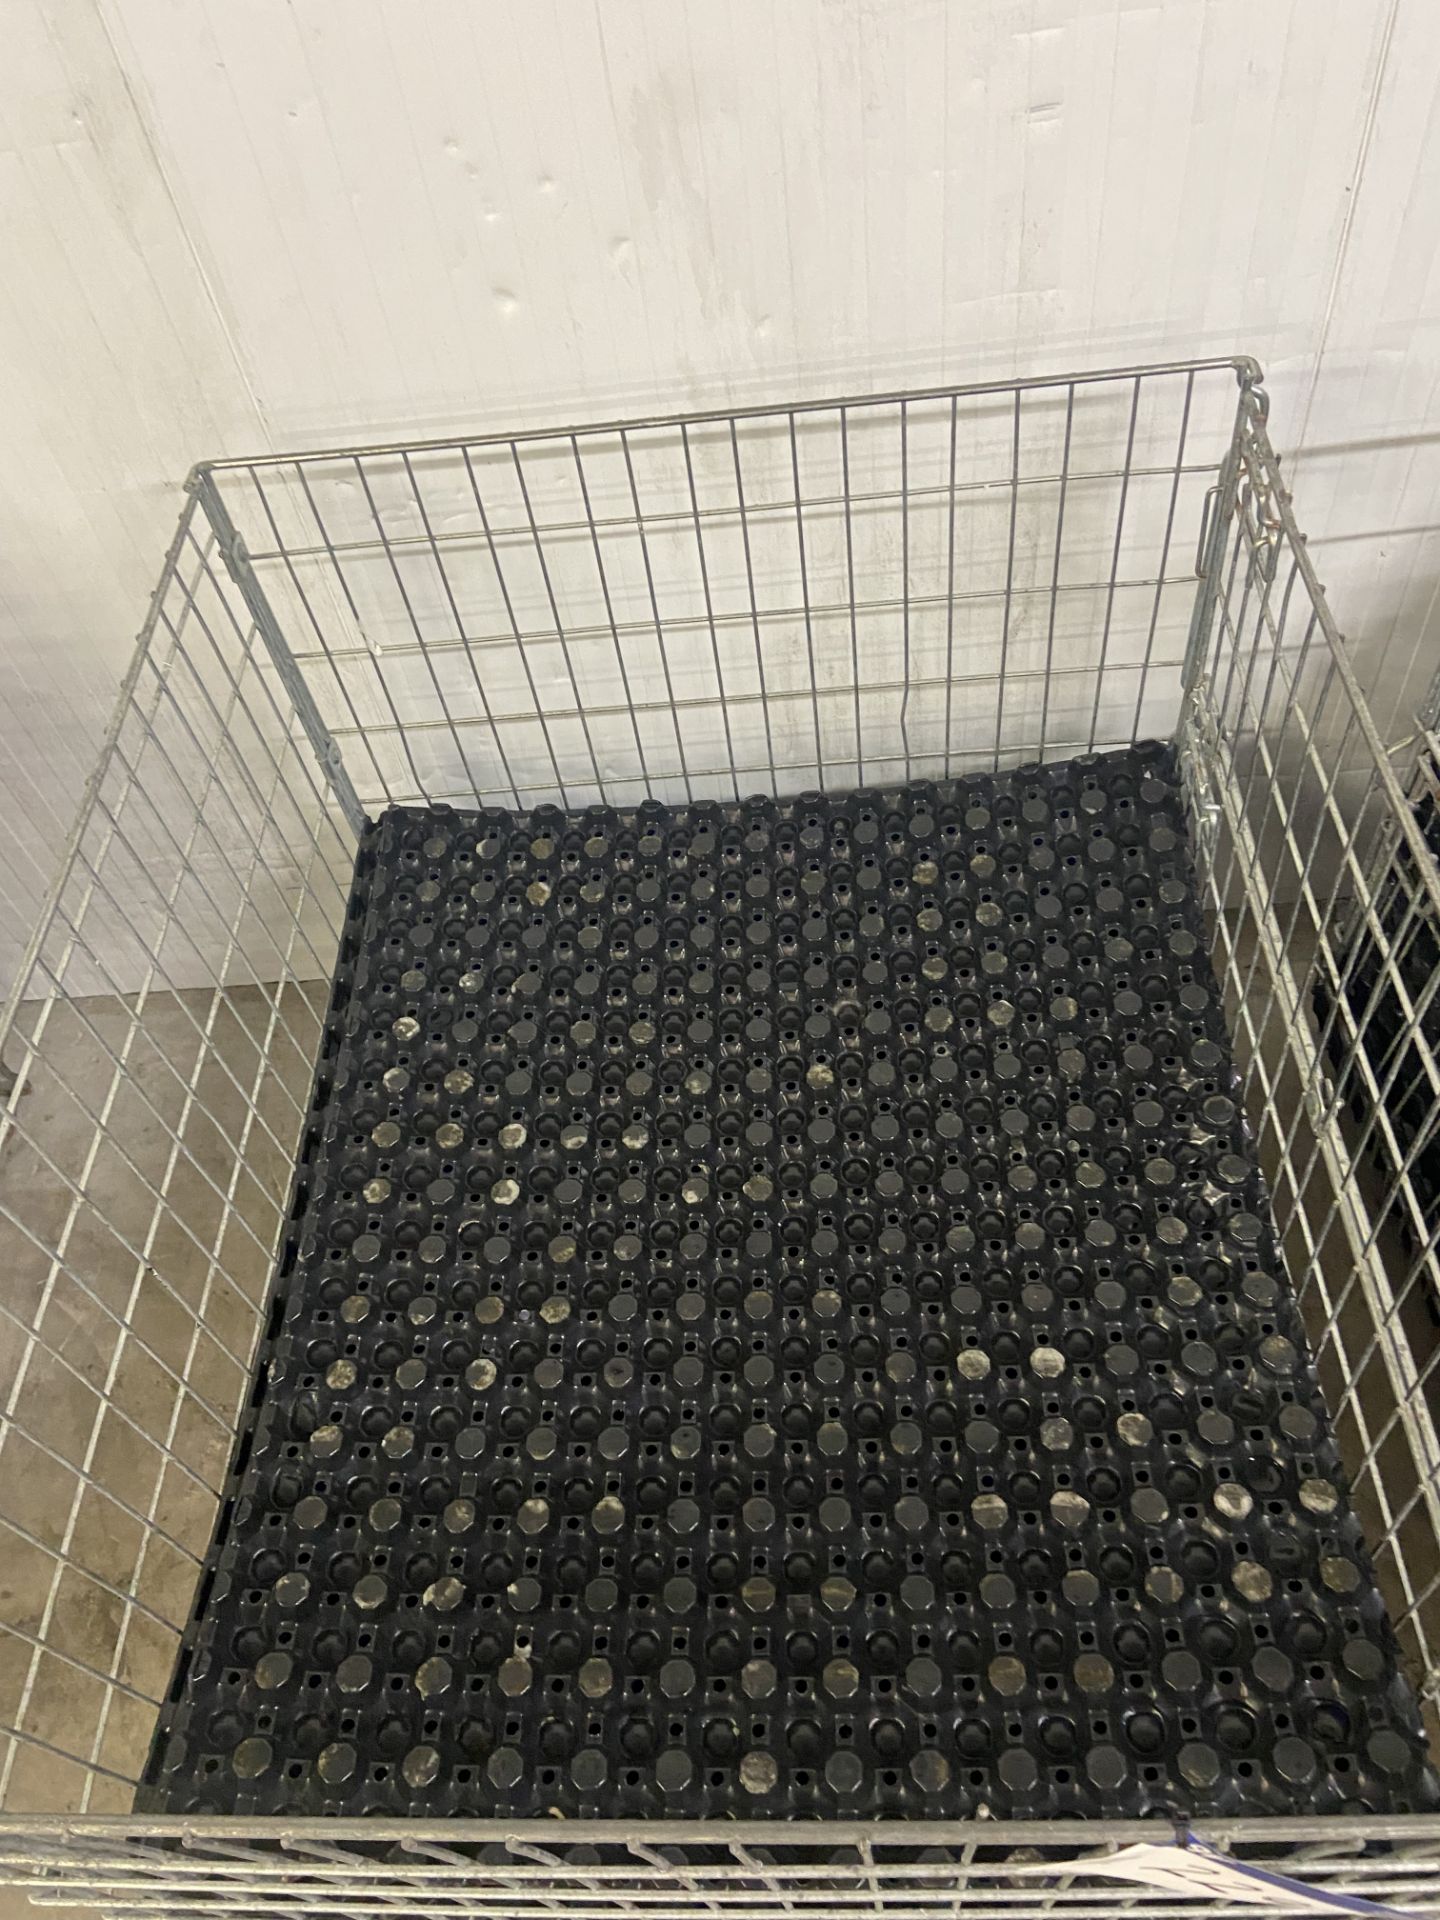 Galvanised Steel Collapsible Cage Box Pallet, approx. 1.2m x 1m x approx. 800mm deep, with plastic - Image 2 of 2